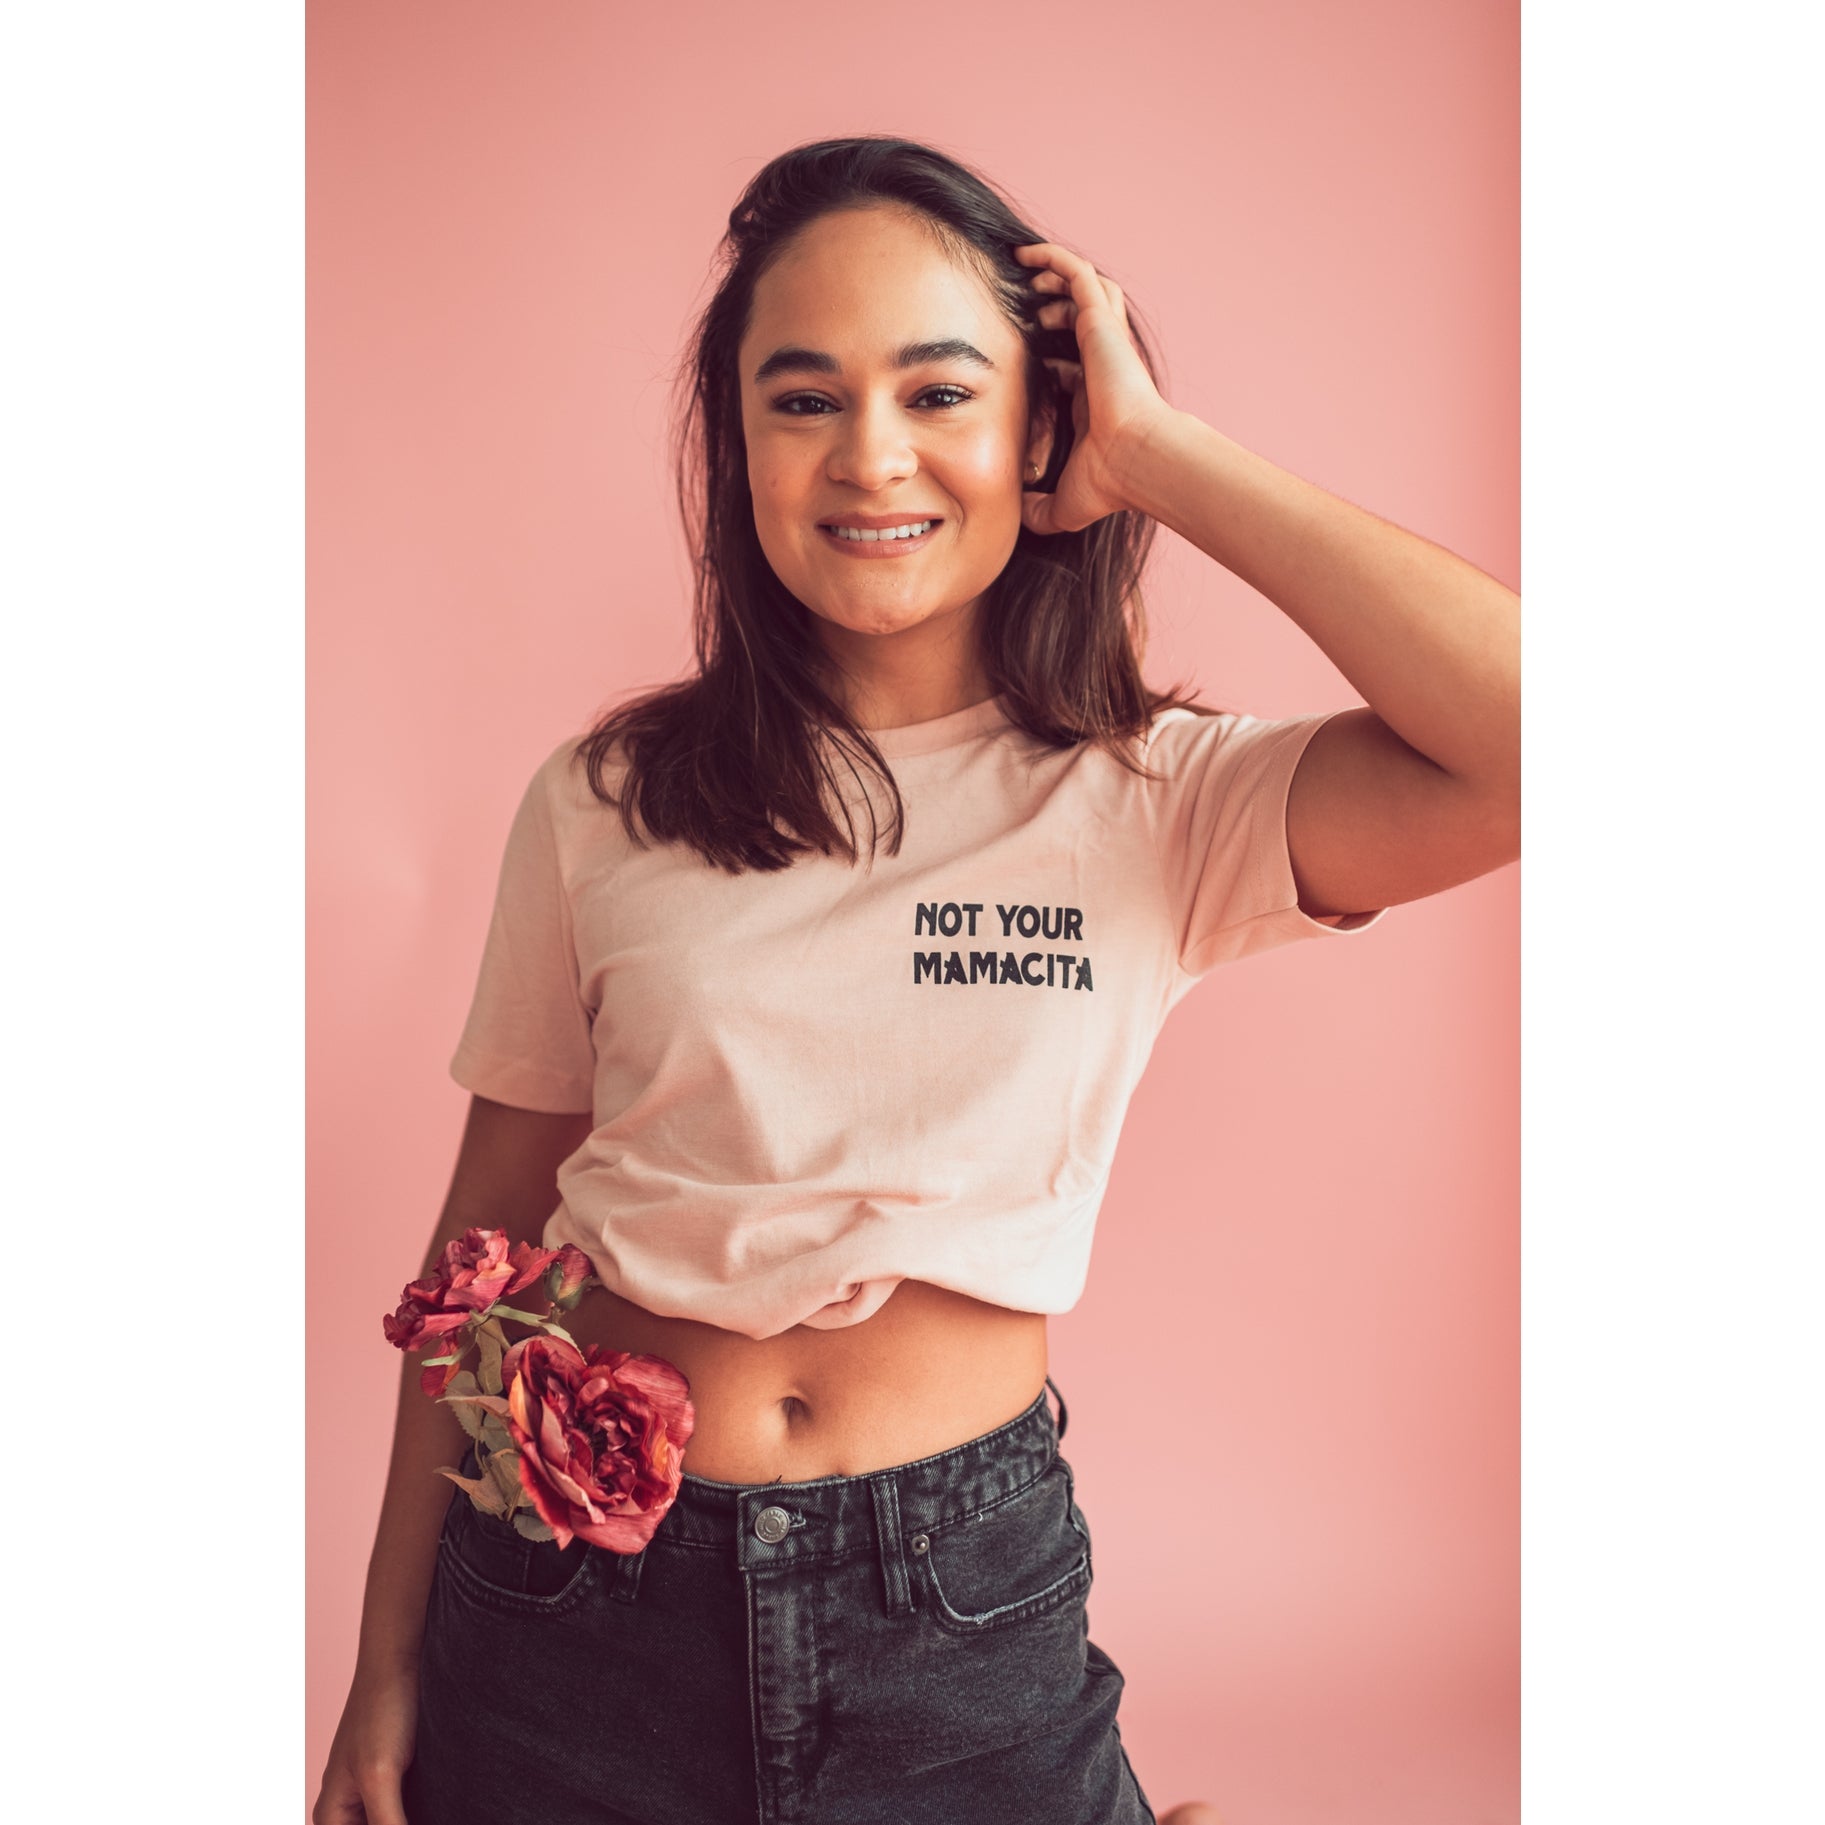 NOT YOUR MAMACITA TEE by Earthy Plant Mama: A bold peach colored tee featuring the message 'Not Your Mamacita' for strong and independent women."